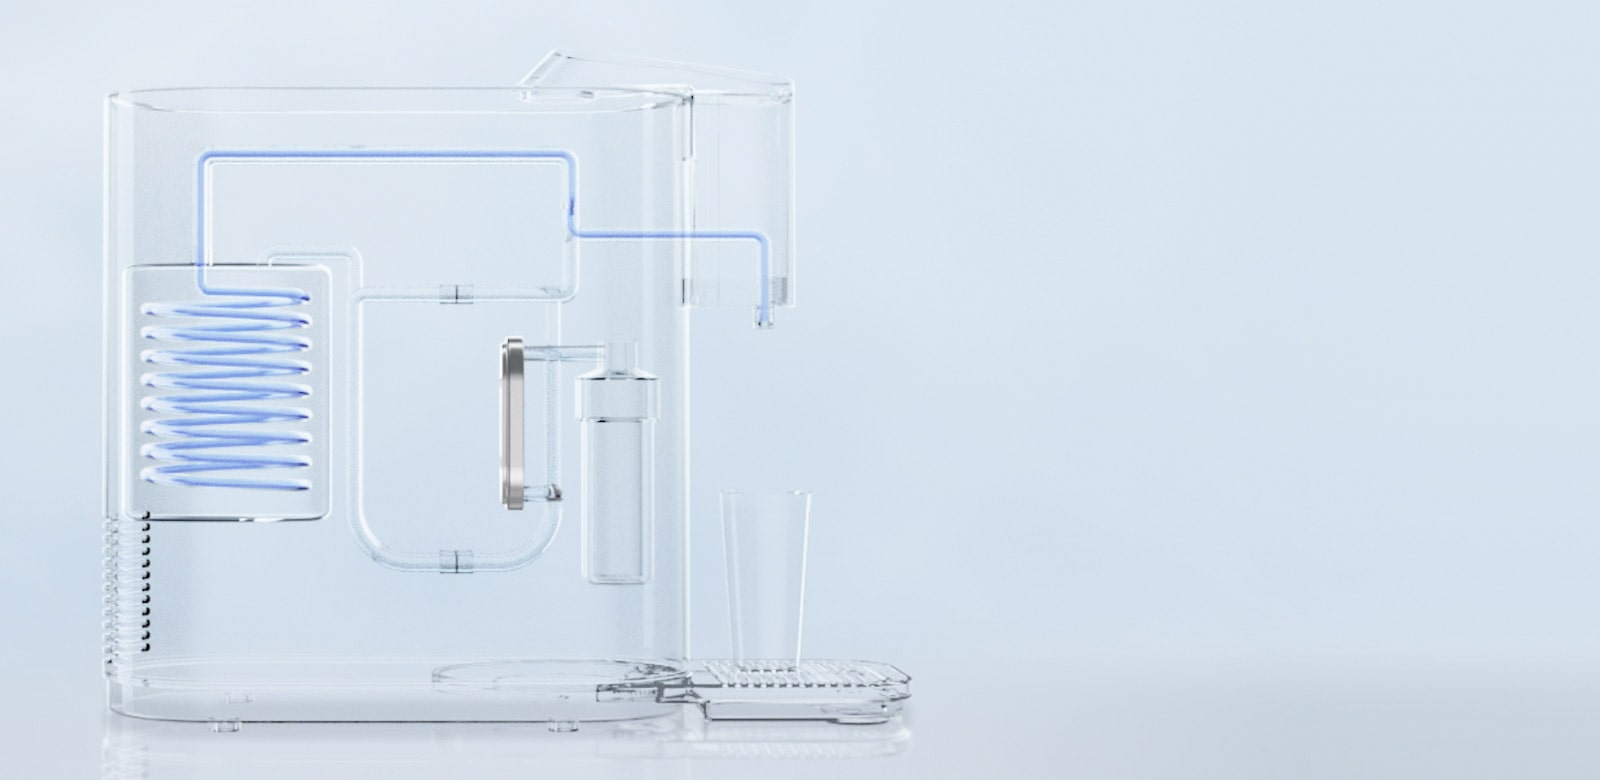 The interior of the water purifier is shown with an invisible exterior to show how the system is tankless and water flows through continusouly and never sits inside.